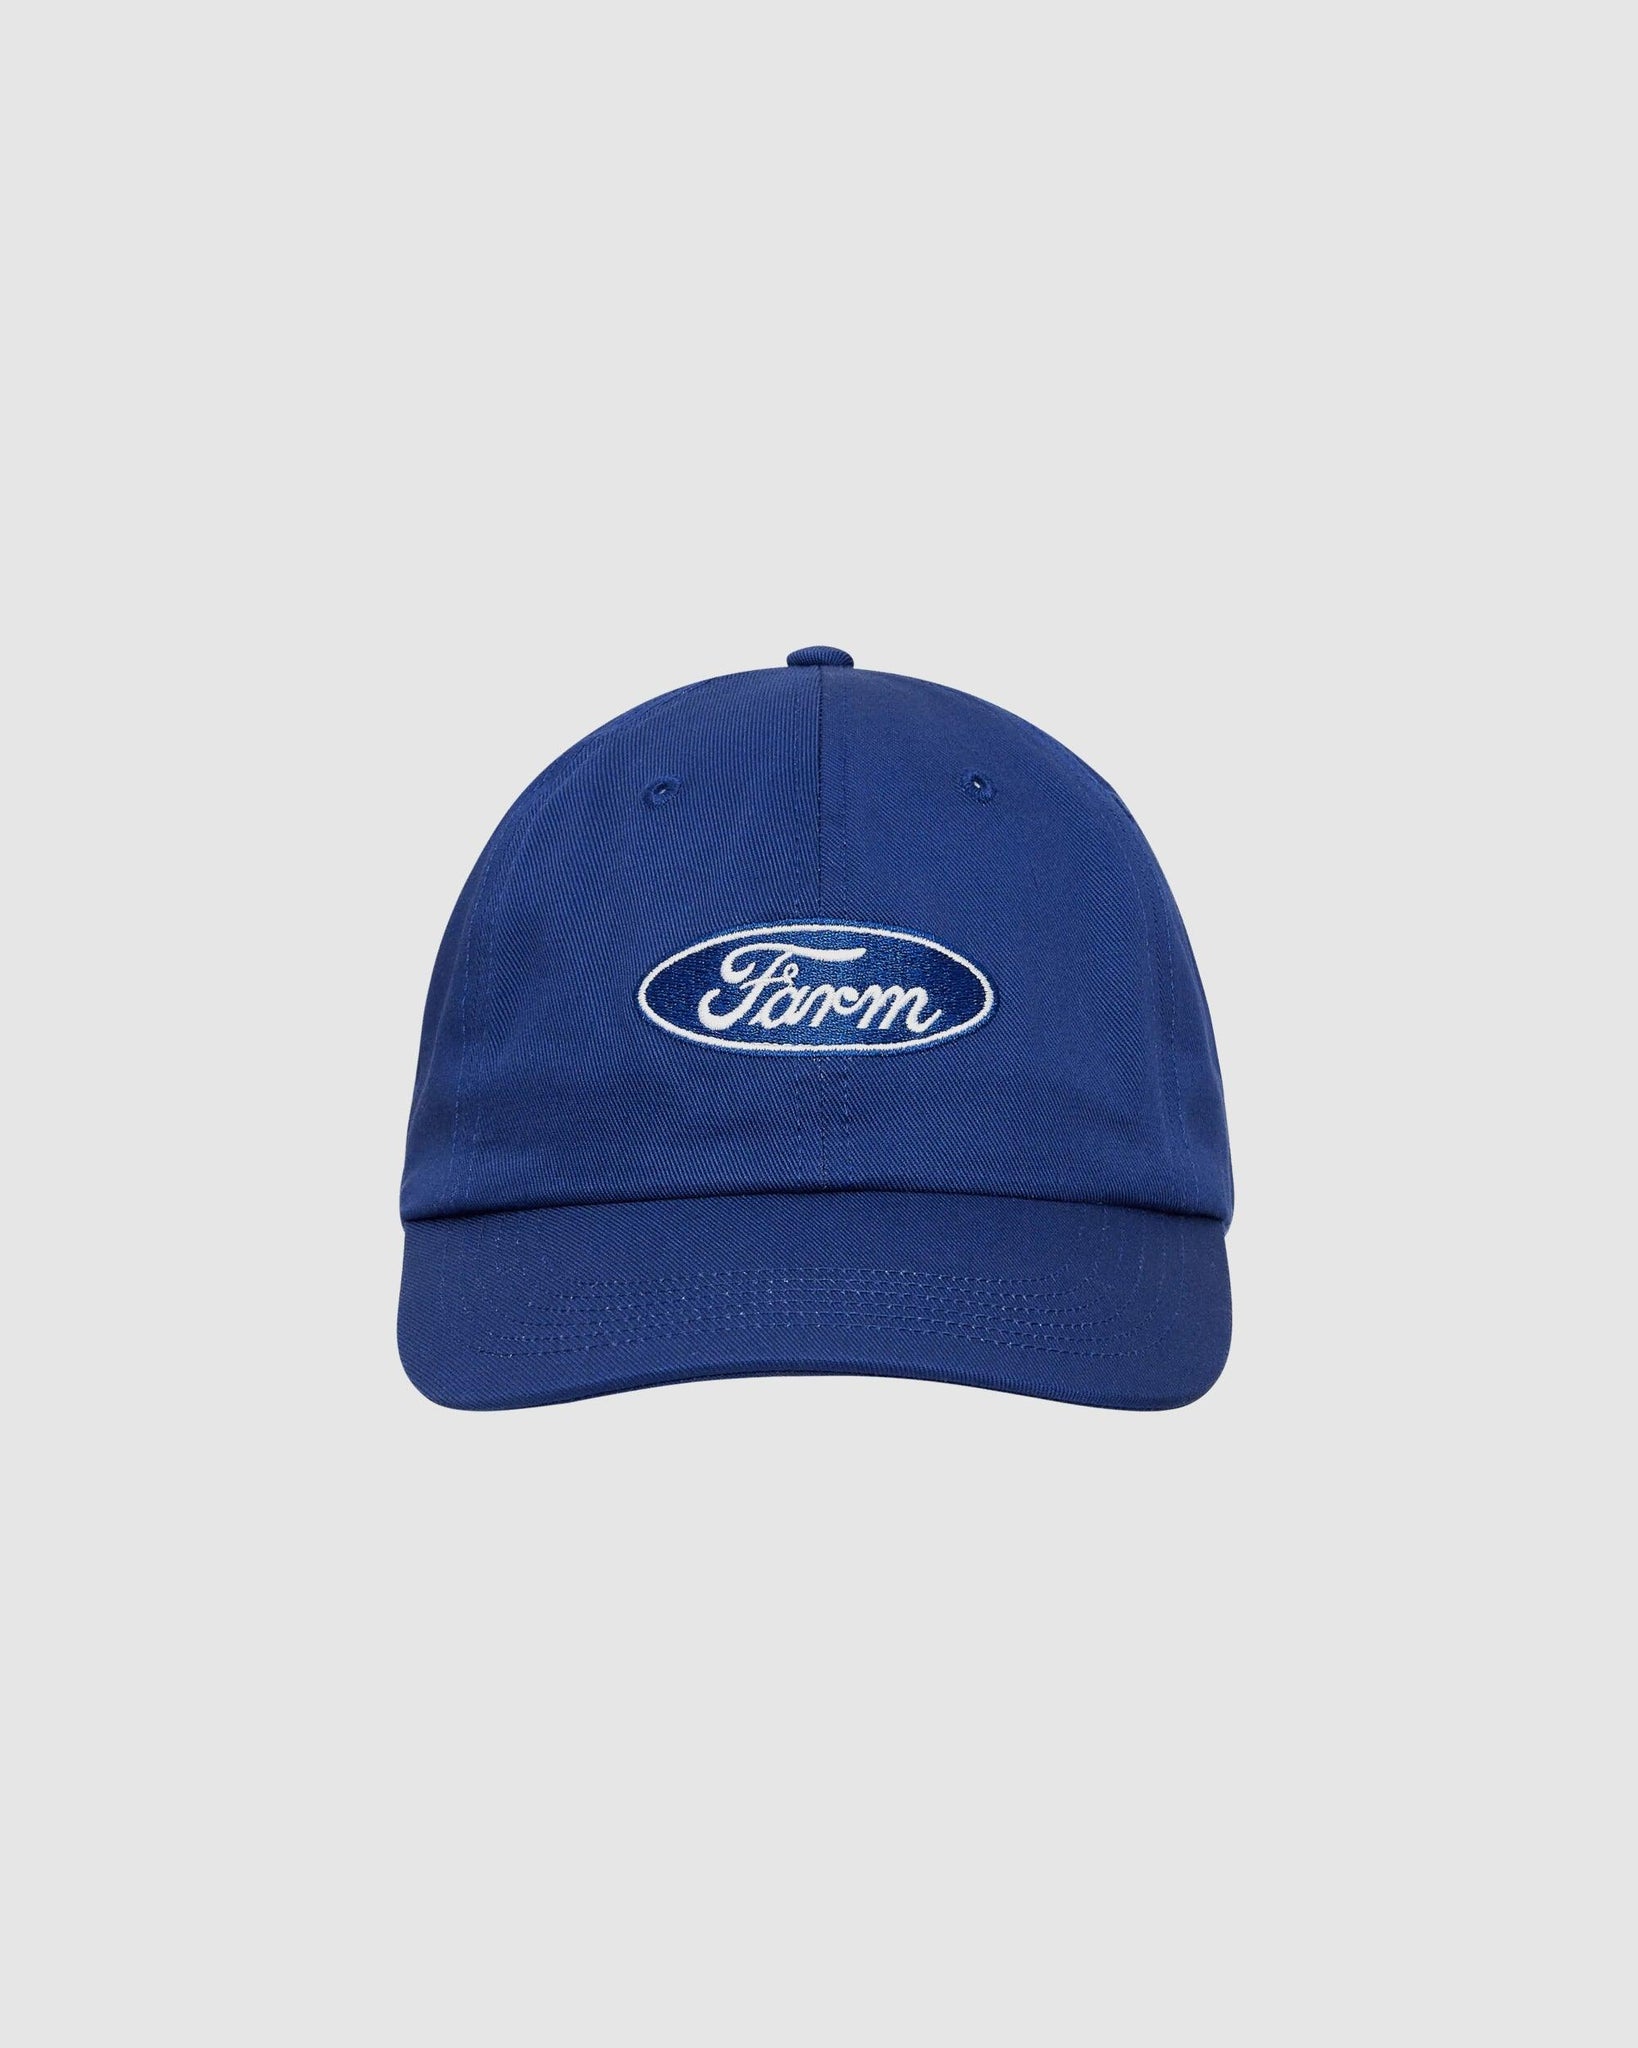 Quil Lemons Farm Cap - {{ collection.title }} - Chinatown Country Club 